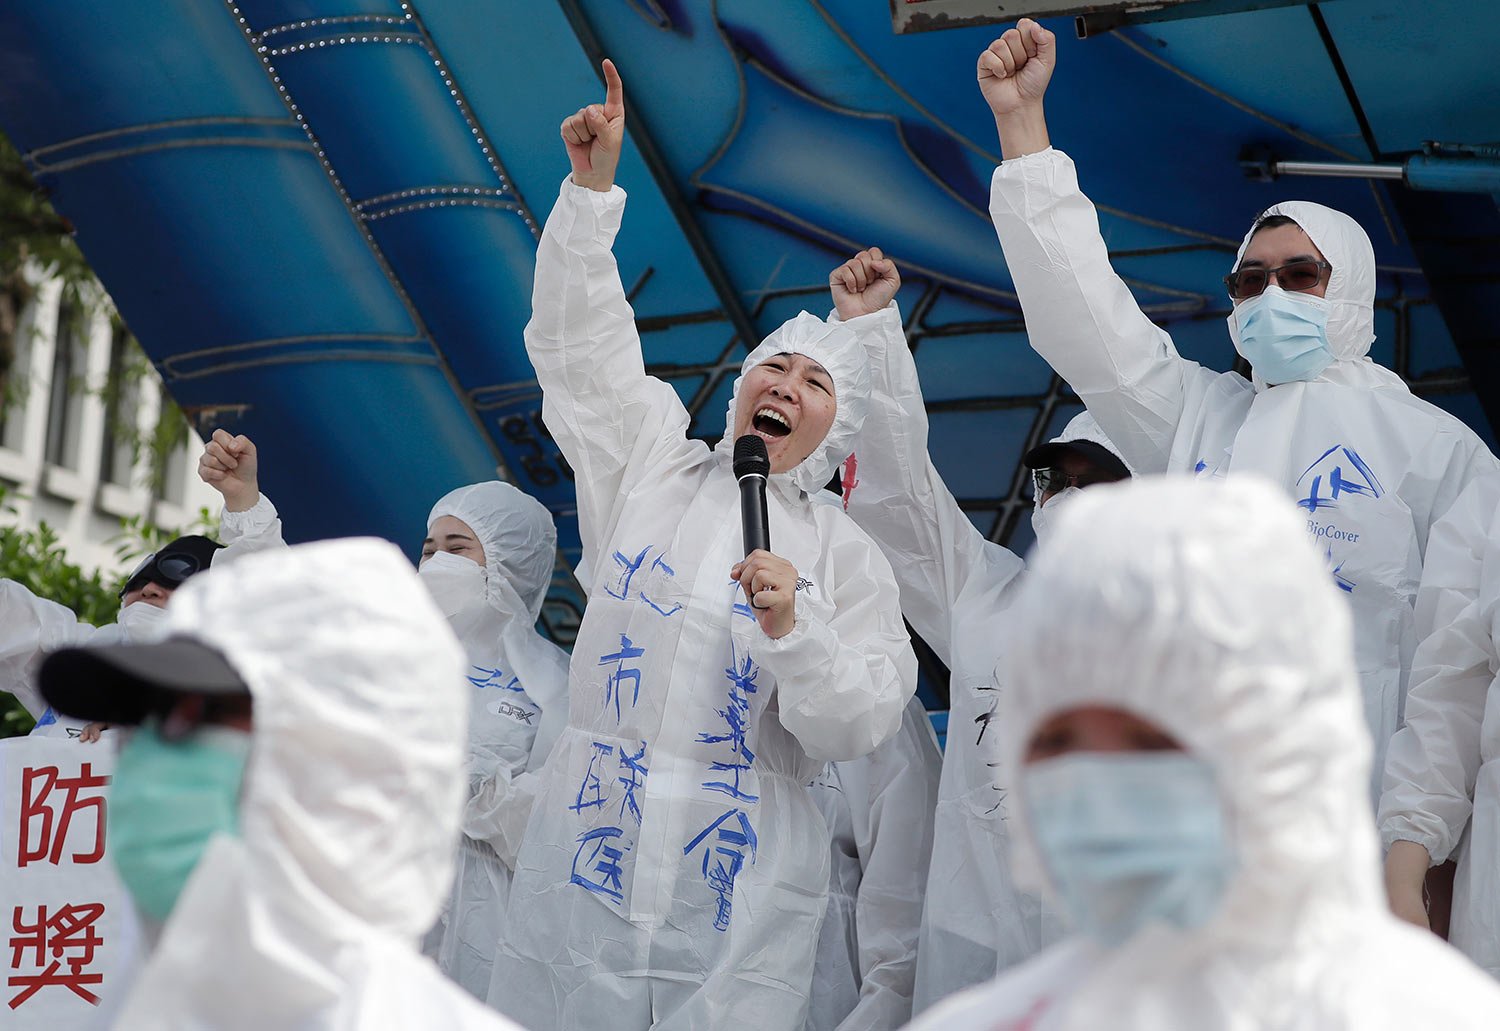  Medical personnel shout slogans during a May Day rally in Taipei, Taiwan, Monday, May 1, 2023.  (AP Photo/Chiang Ying-ying) 